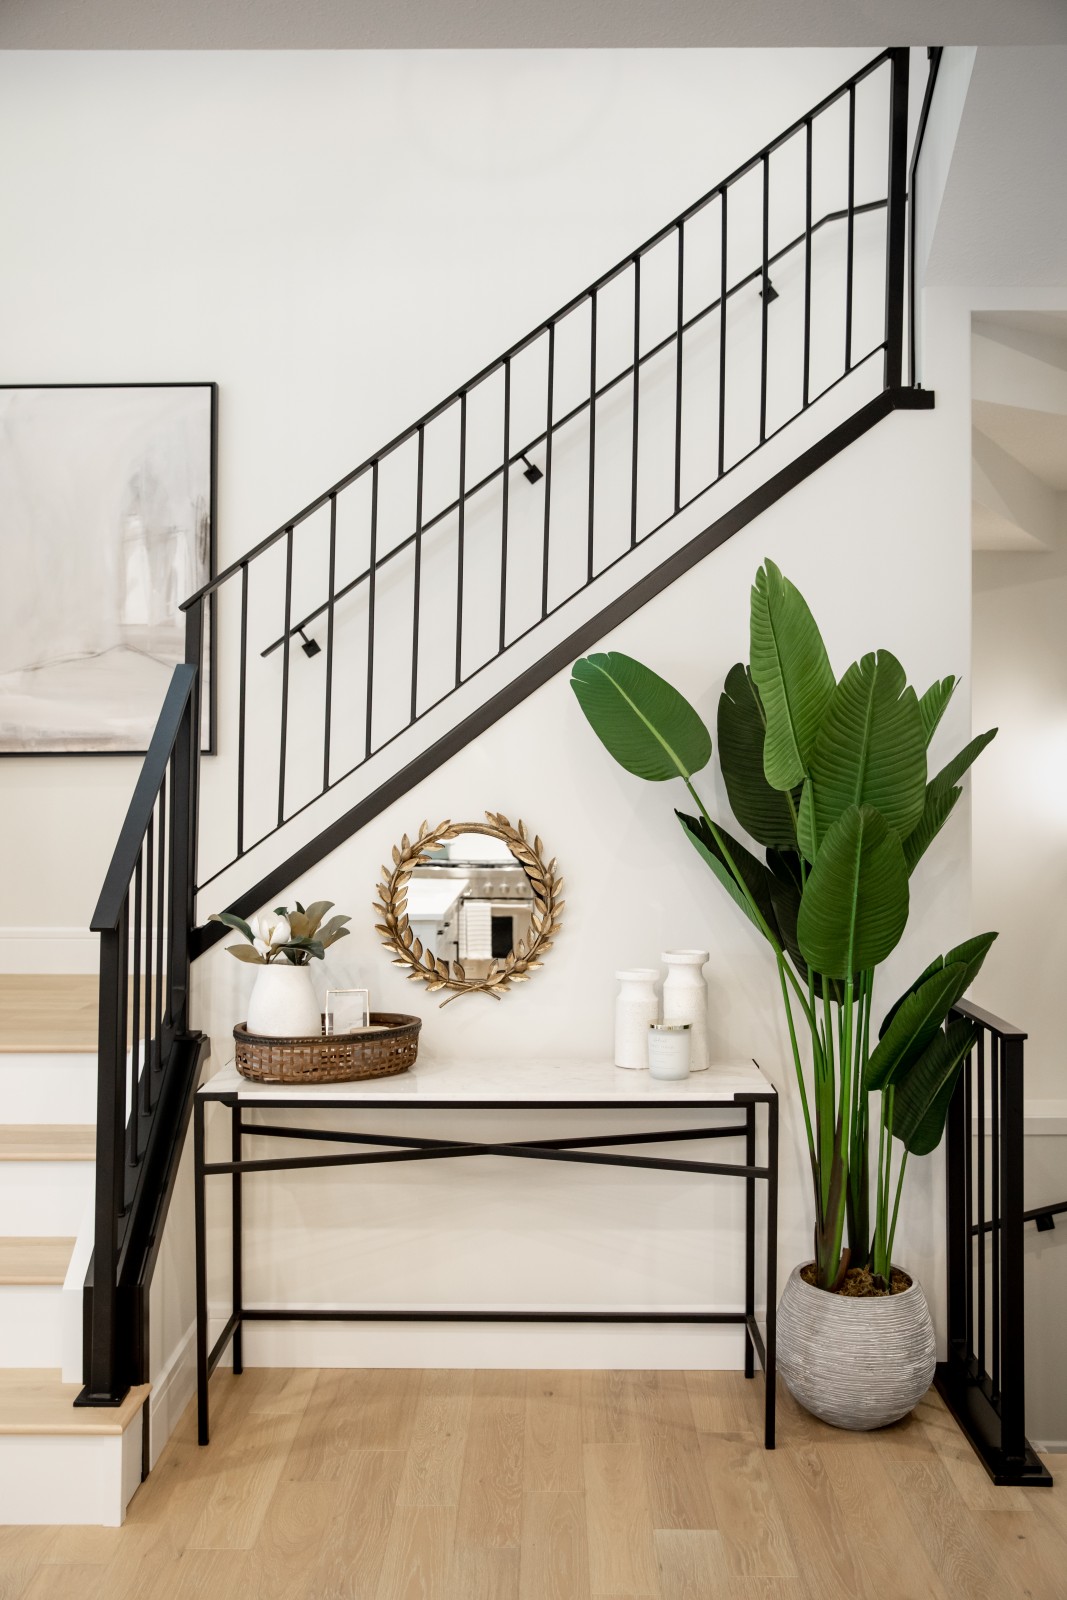 Black iron railing leading from the main floor to the second pop off of the warm white walls. In the nook below the railing a side table is accessorized with a small gold mirror on the wall, small white and natural vases and a large leafed floor plant